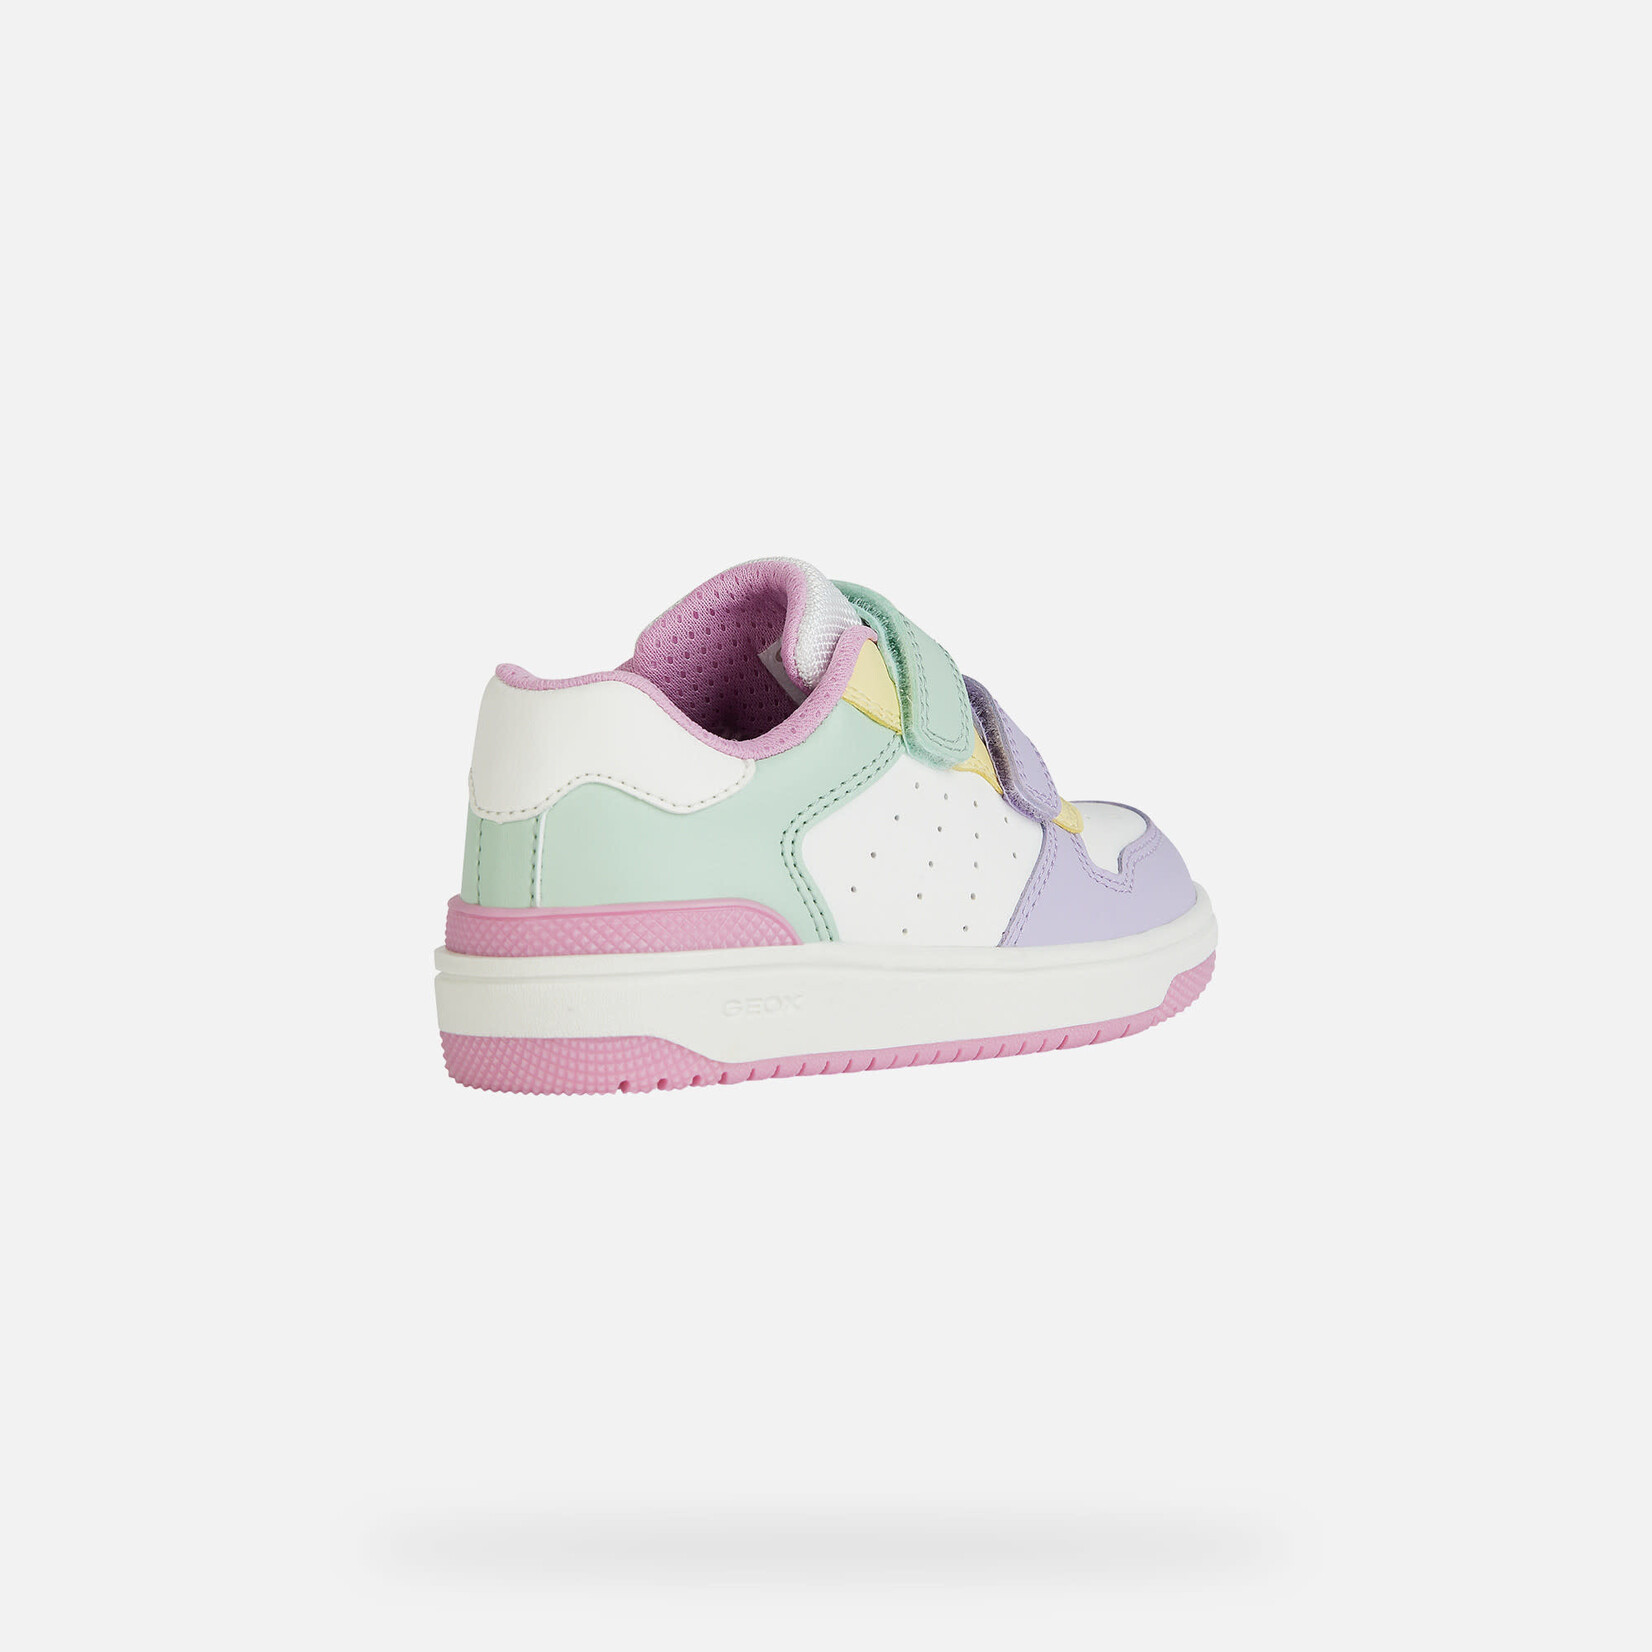 Geox GEOX - White and pastel synthetic leather sneakers 'Washiba - White/Multicolor'